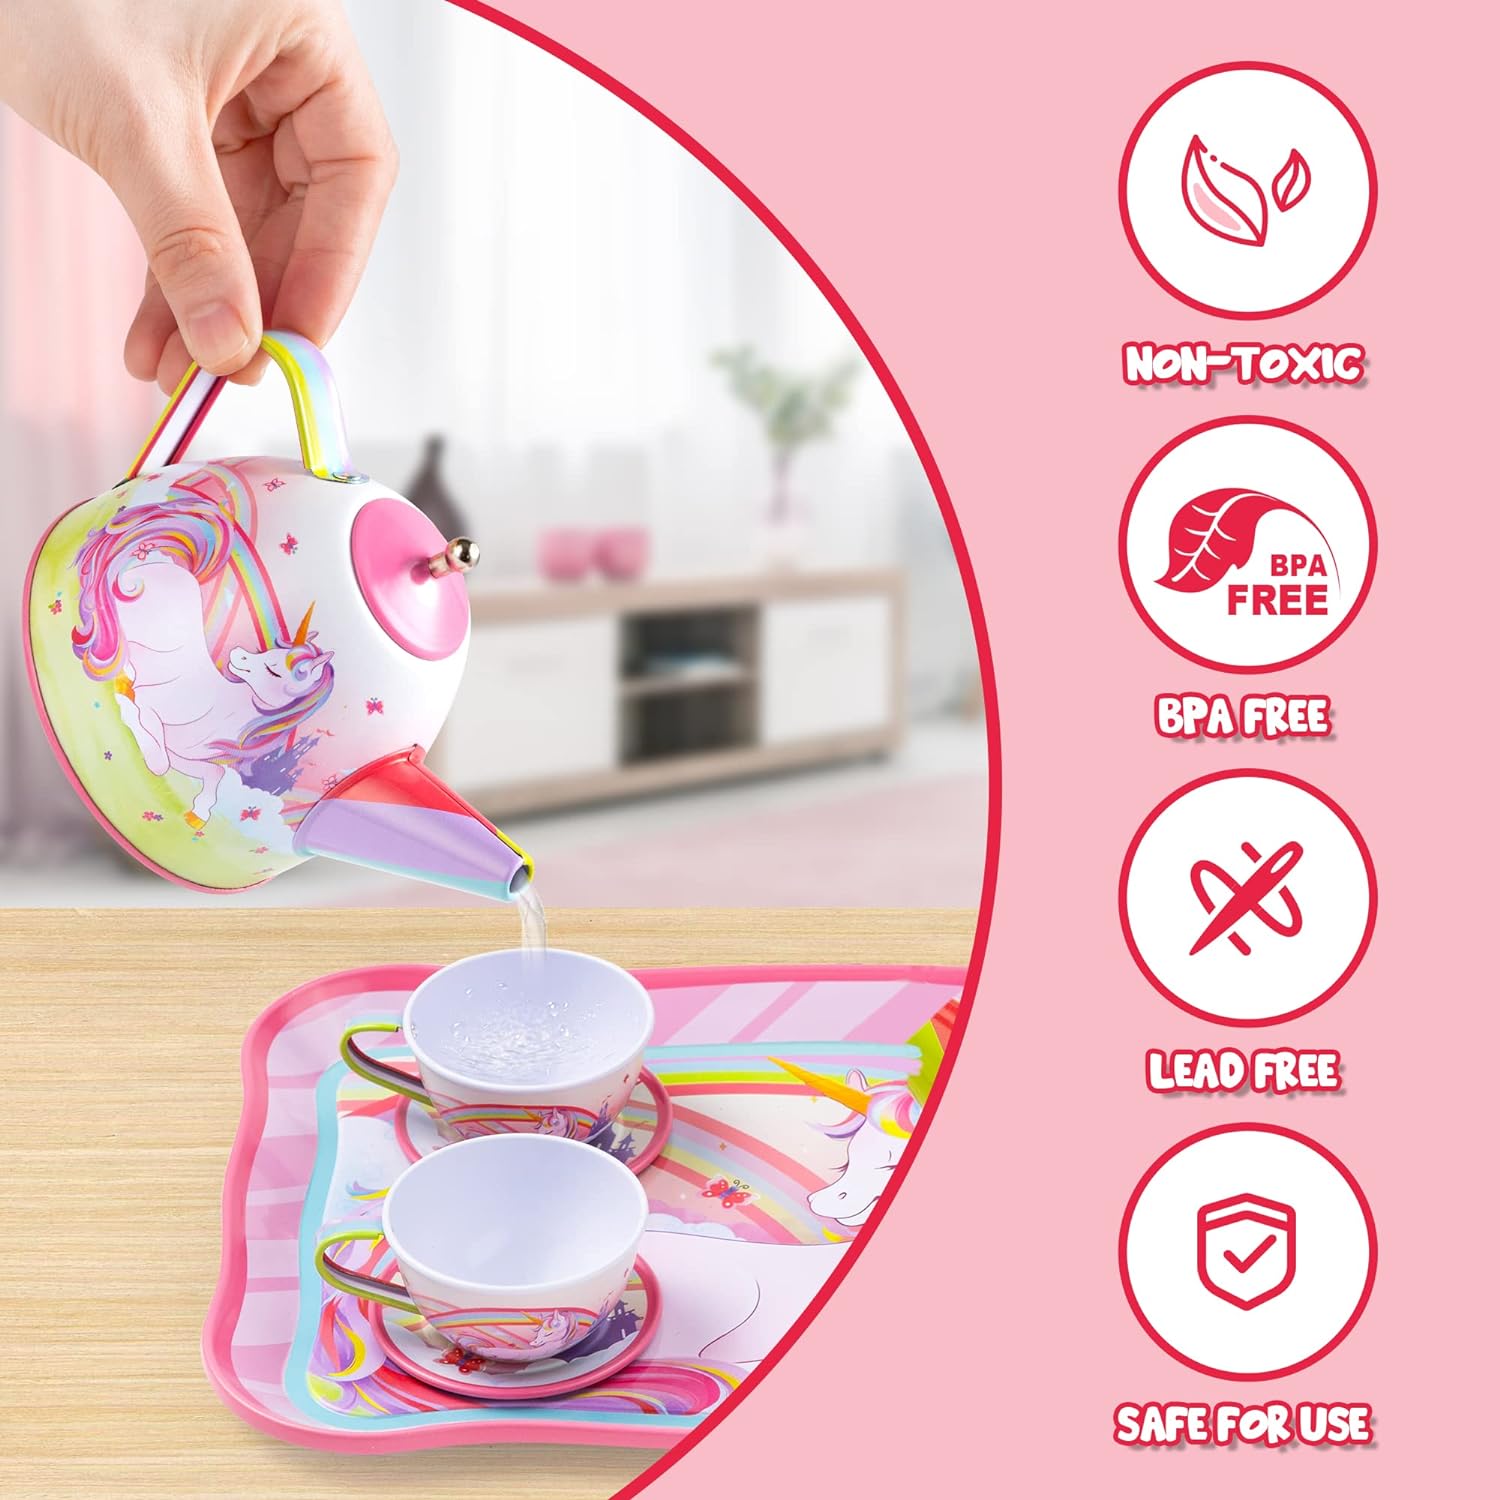 JOYIN Unicorn Castle Tea Set for Toddlers, Pretend Tin Teapot Set for Girls, Princess Tea Party Set Kitchen Toy with Teapot, Cups, Plates and Carrying Case for Birthday Gifts Kids Toddlers Age 3 4 5 6